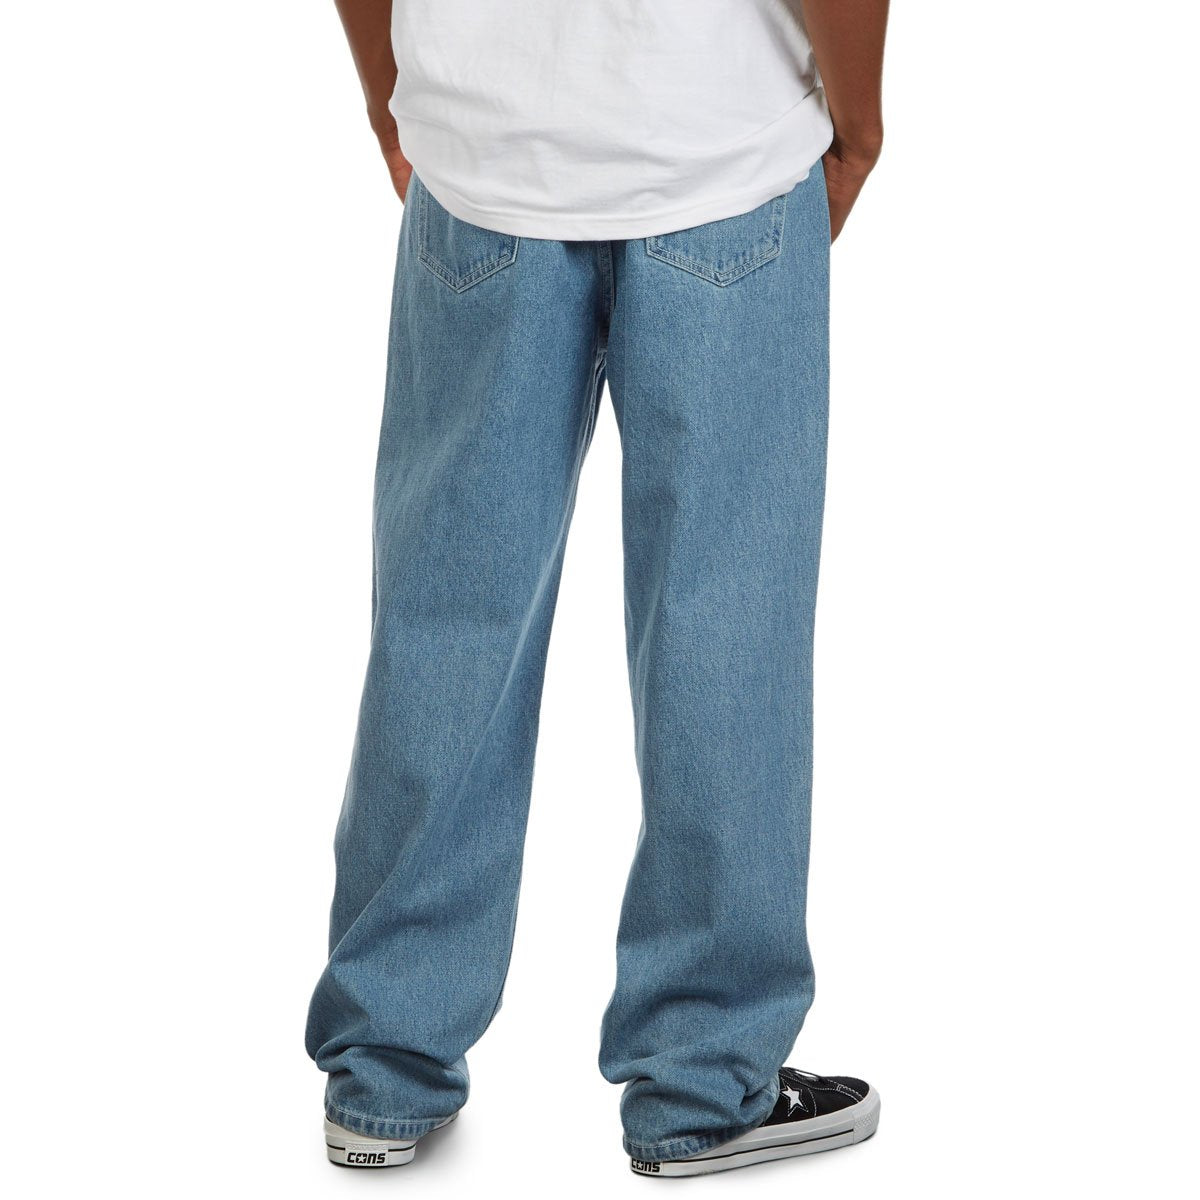 CCS Original Relaxed Denim Jeans - Rinsed Blue image 3